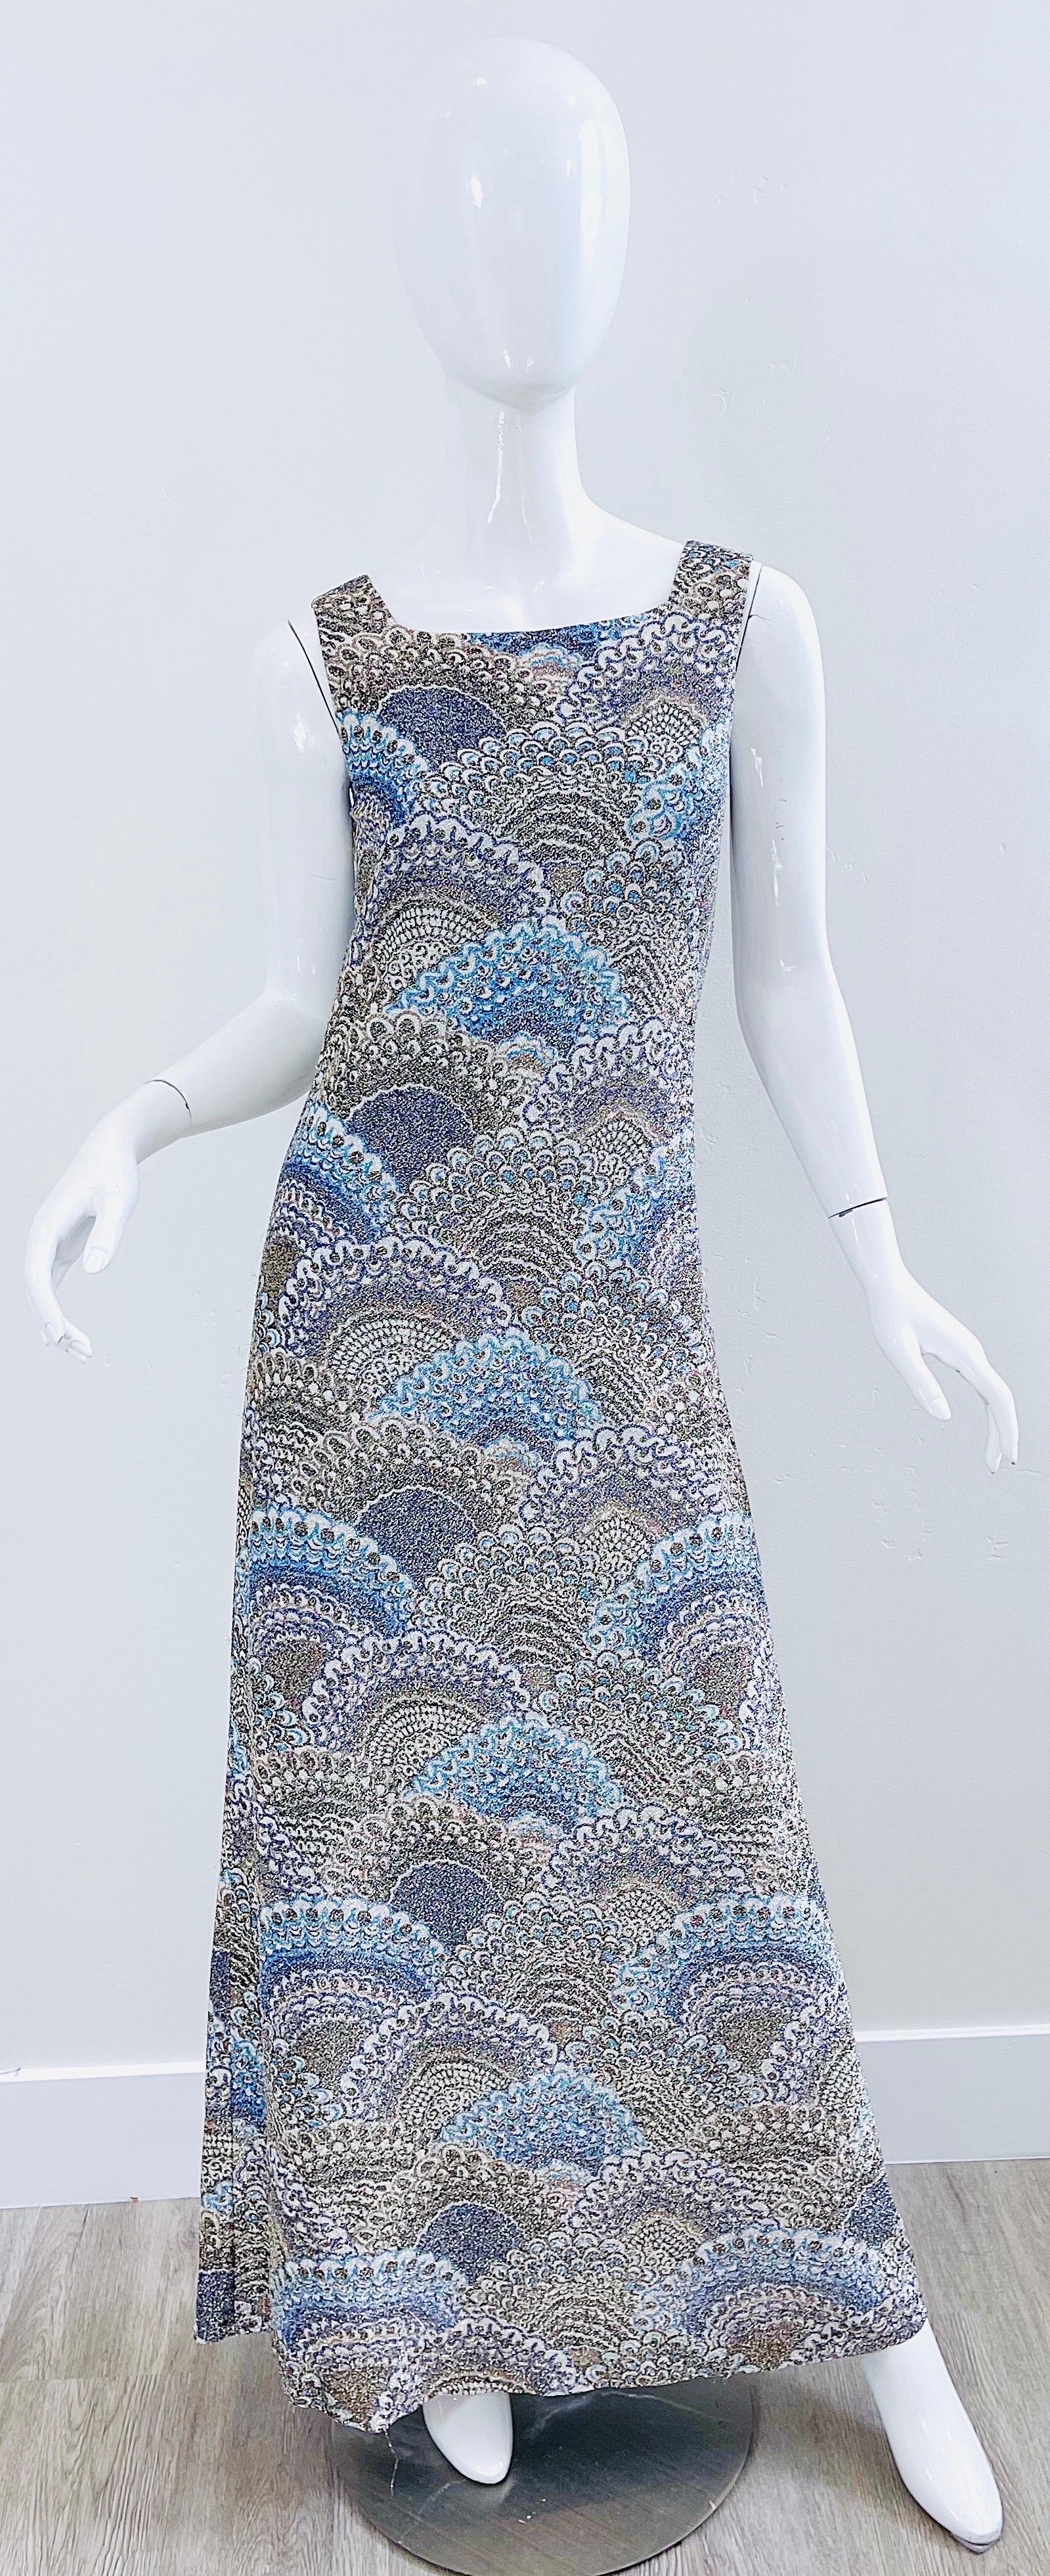 Beautiful early 70s ADELE SIMPSON blue and silver metallic silk lurex sleeveless maxi dress ! Features peacock feathers / fan prints throughout. Hidden metal zipper down the back with hook-and-eye closure. Fully lined.
Fantastic quality with lots of